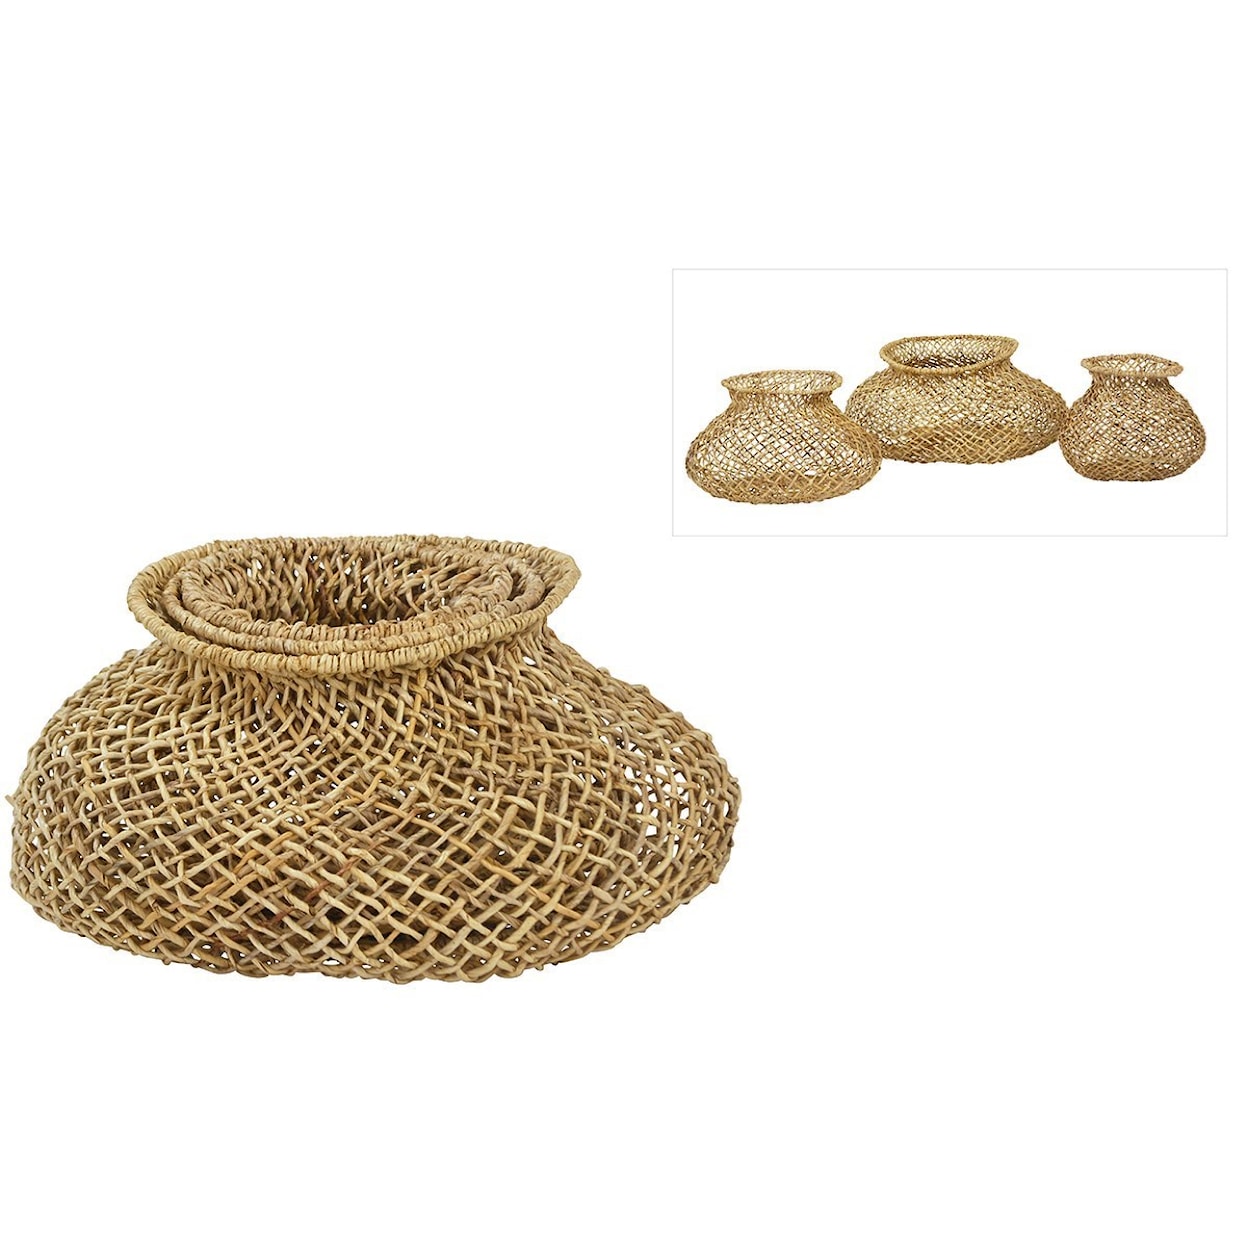 Dovetail Furniture Accessories Basket Set of 3